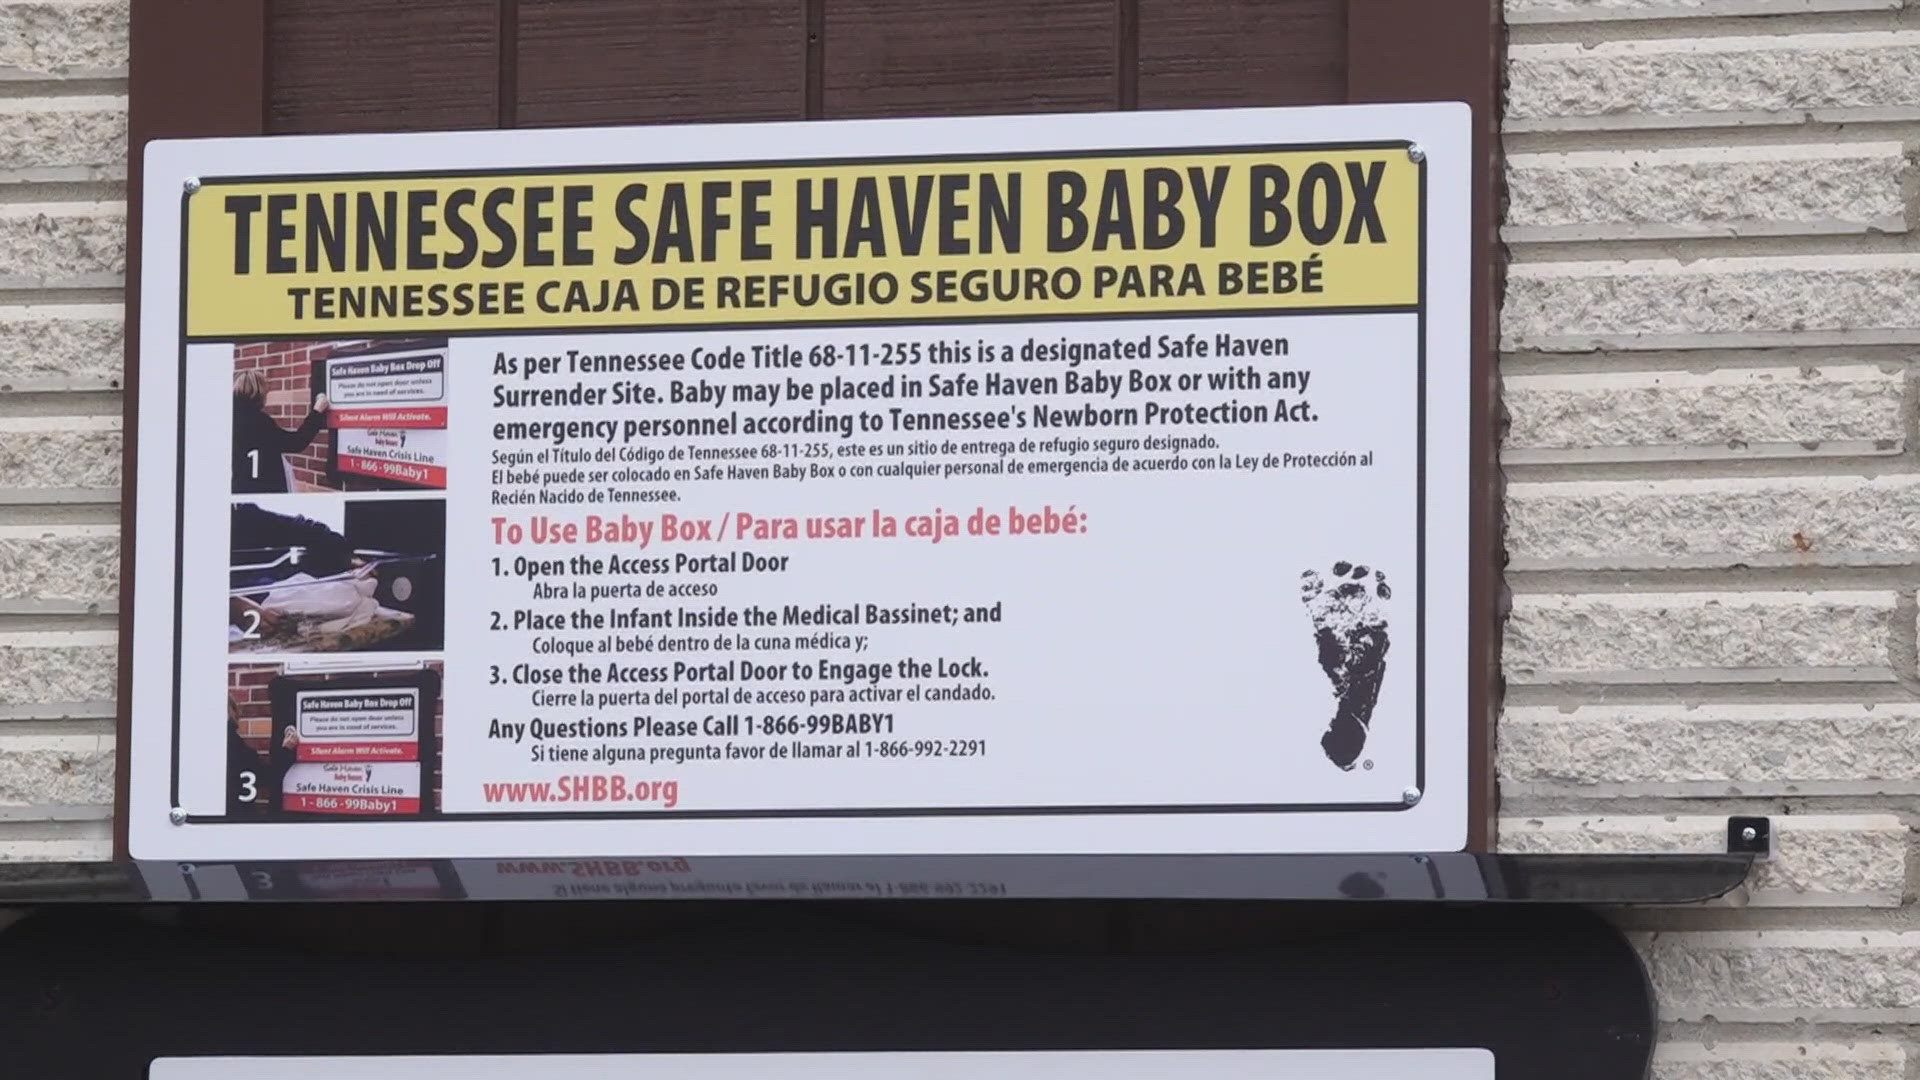 The Baby Box was the first one to be installed in Tennessee, giving new parents a place to safely and anonymously surrender newborns.